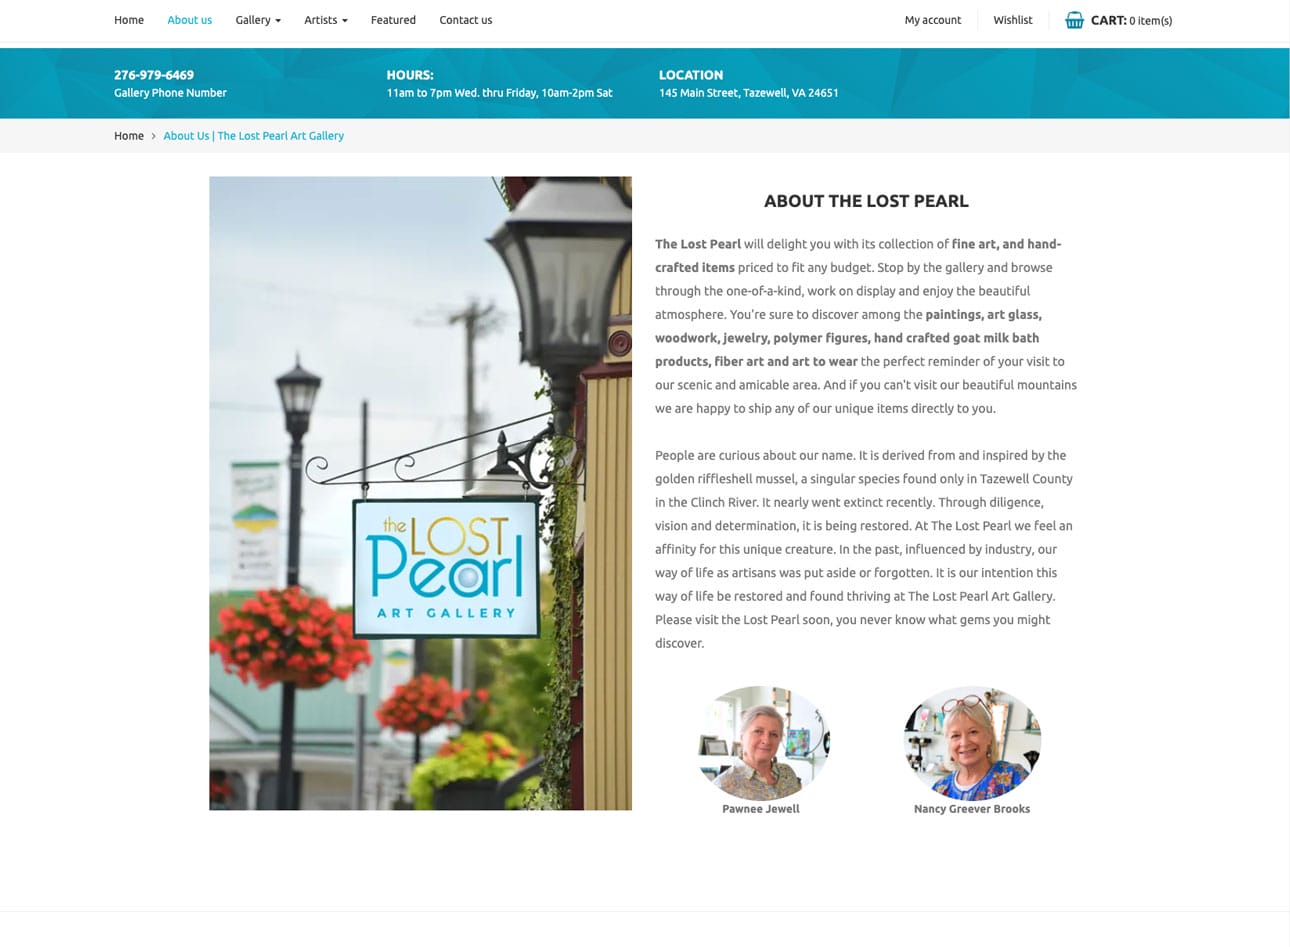 The Lost Pearl Art Gallery Website About us page